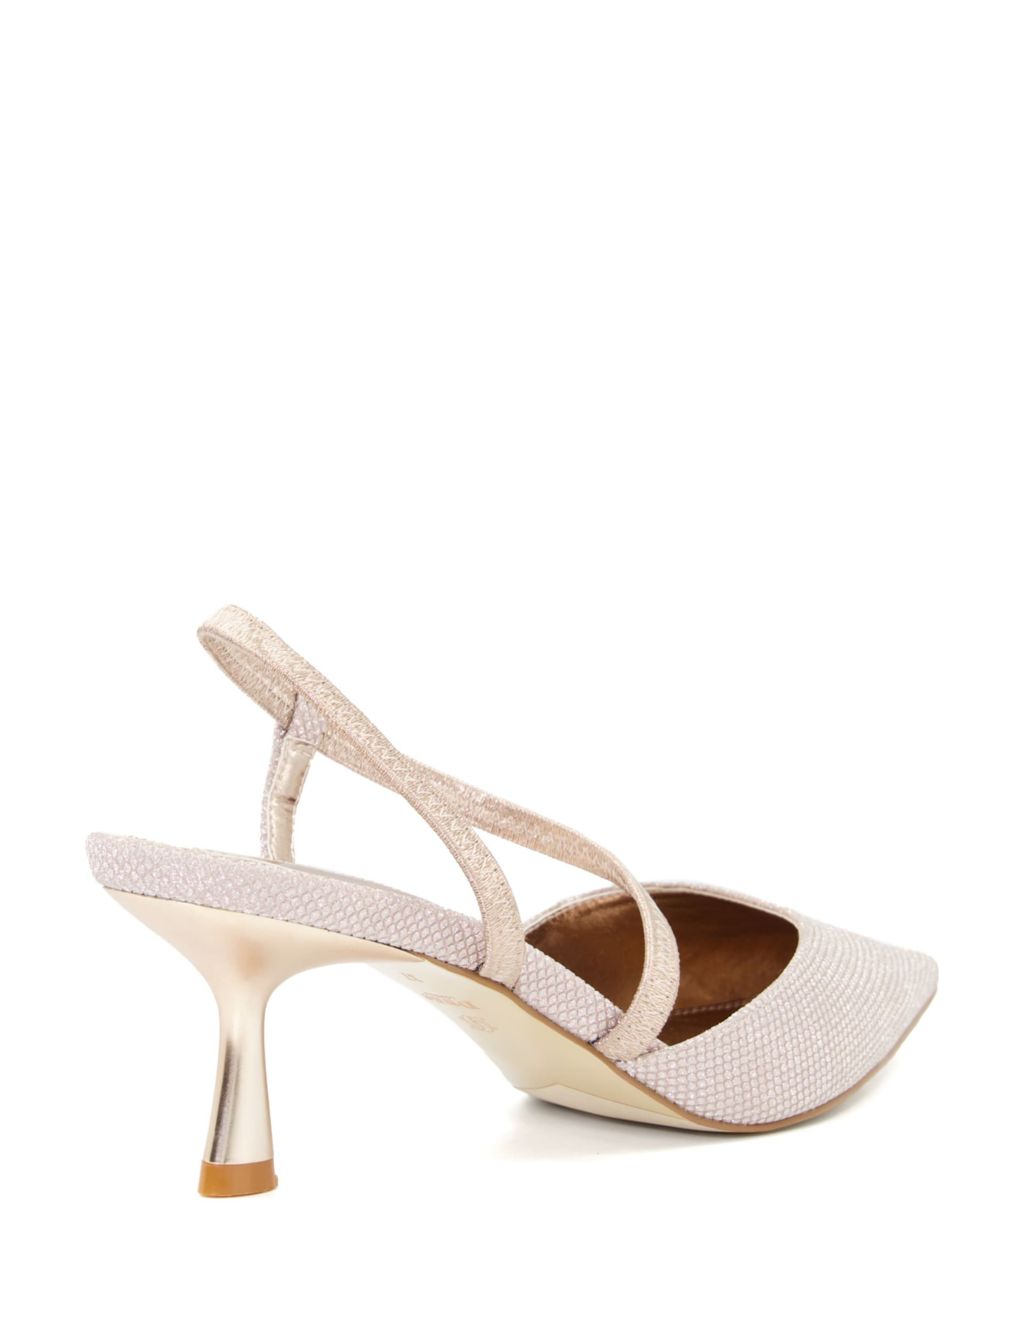 Kitten Heel Pointed Court Shoes image 5